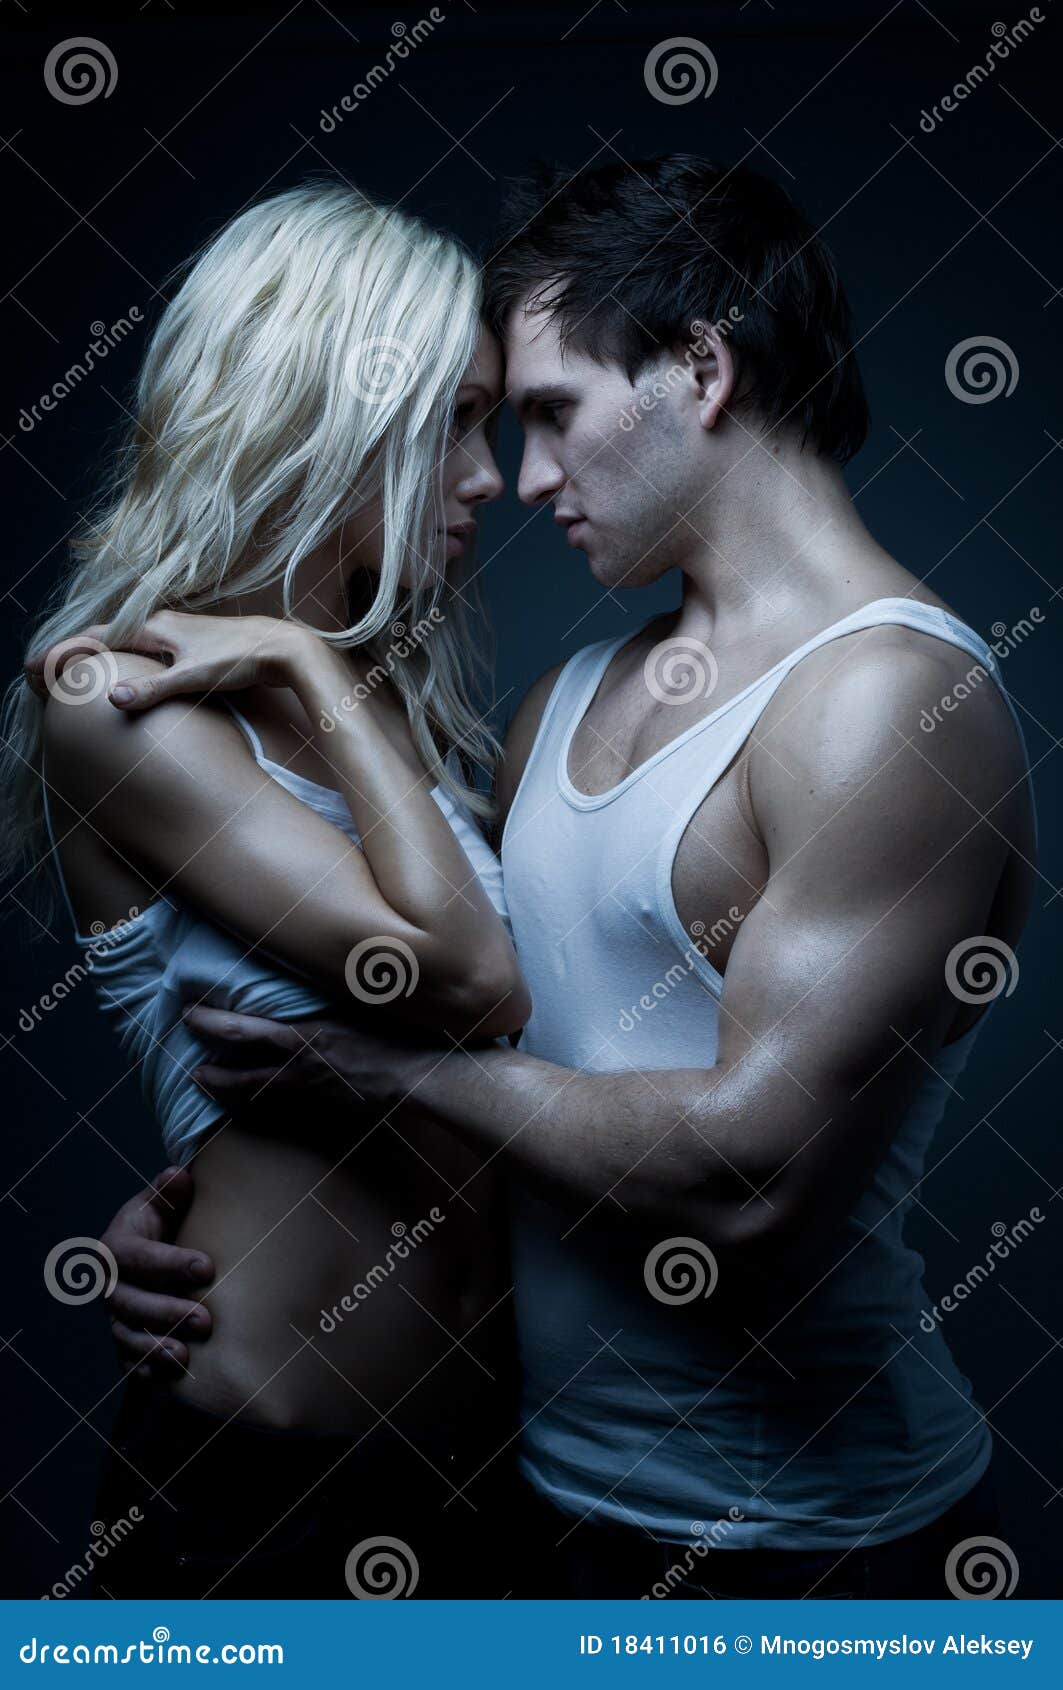 Photo about Muscular handsome guy with pretty woman, on dark background, gl...